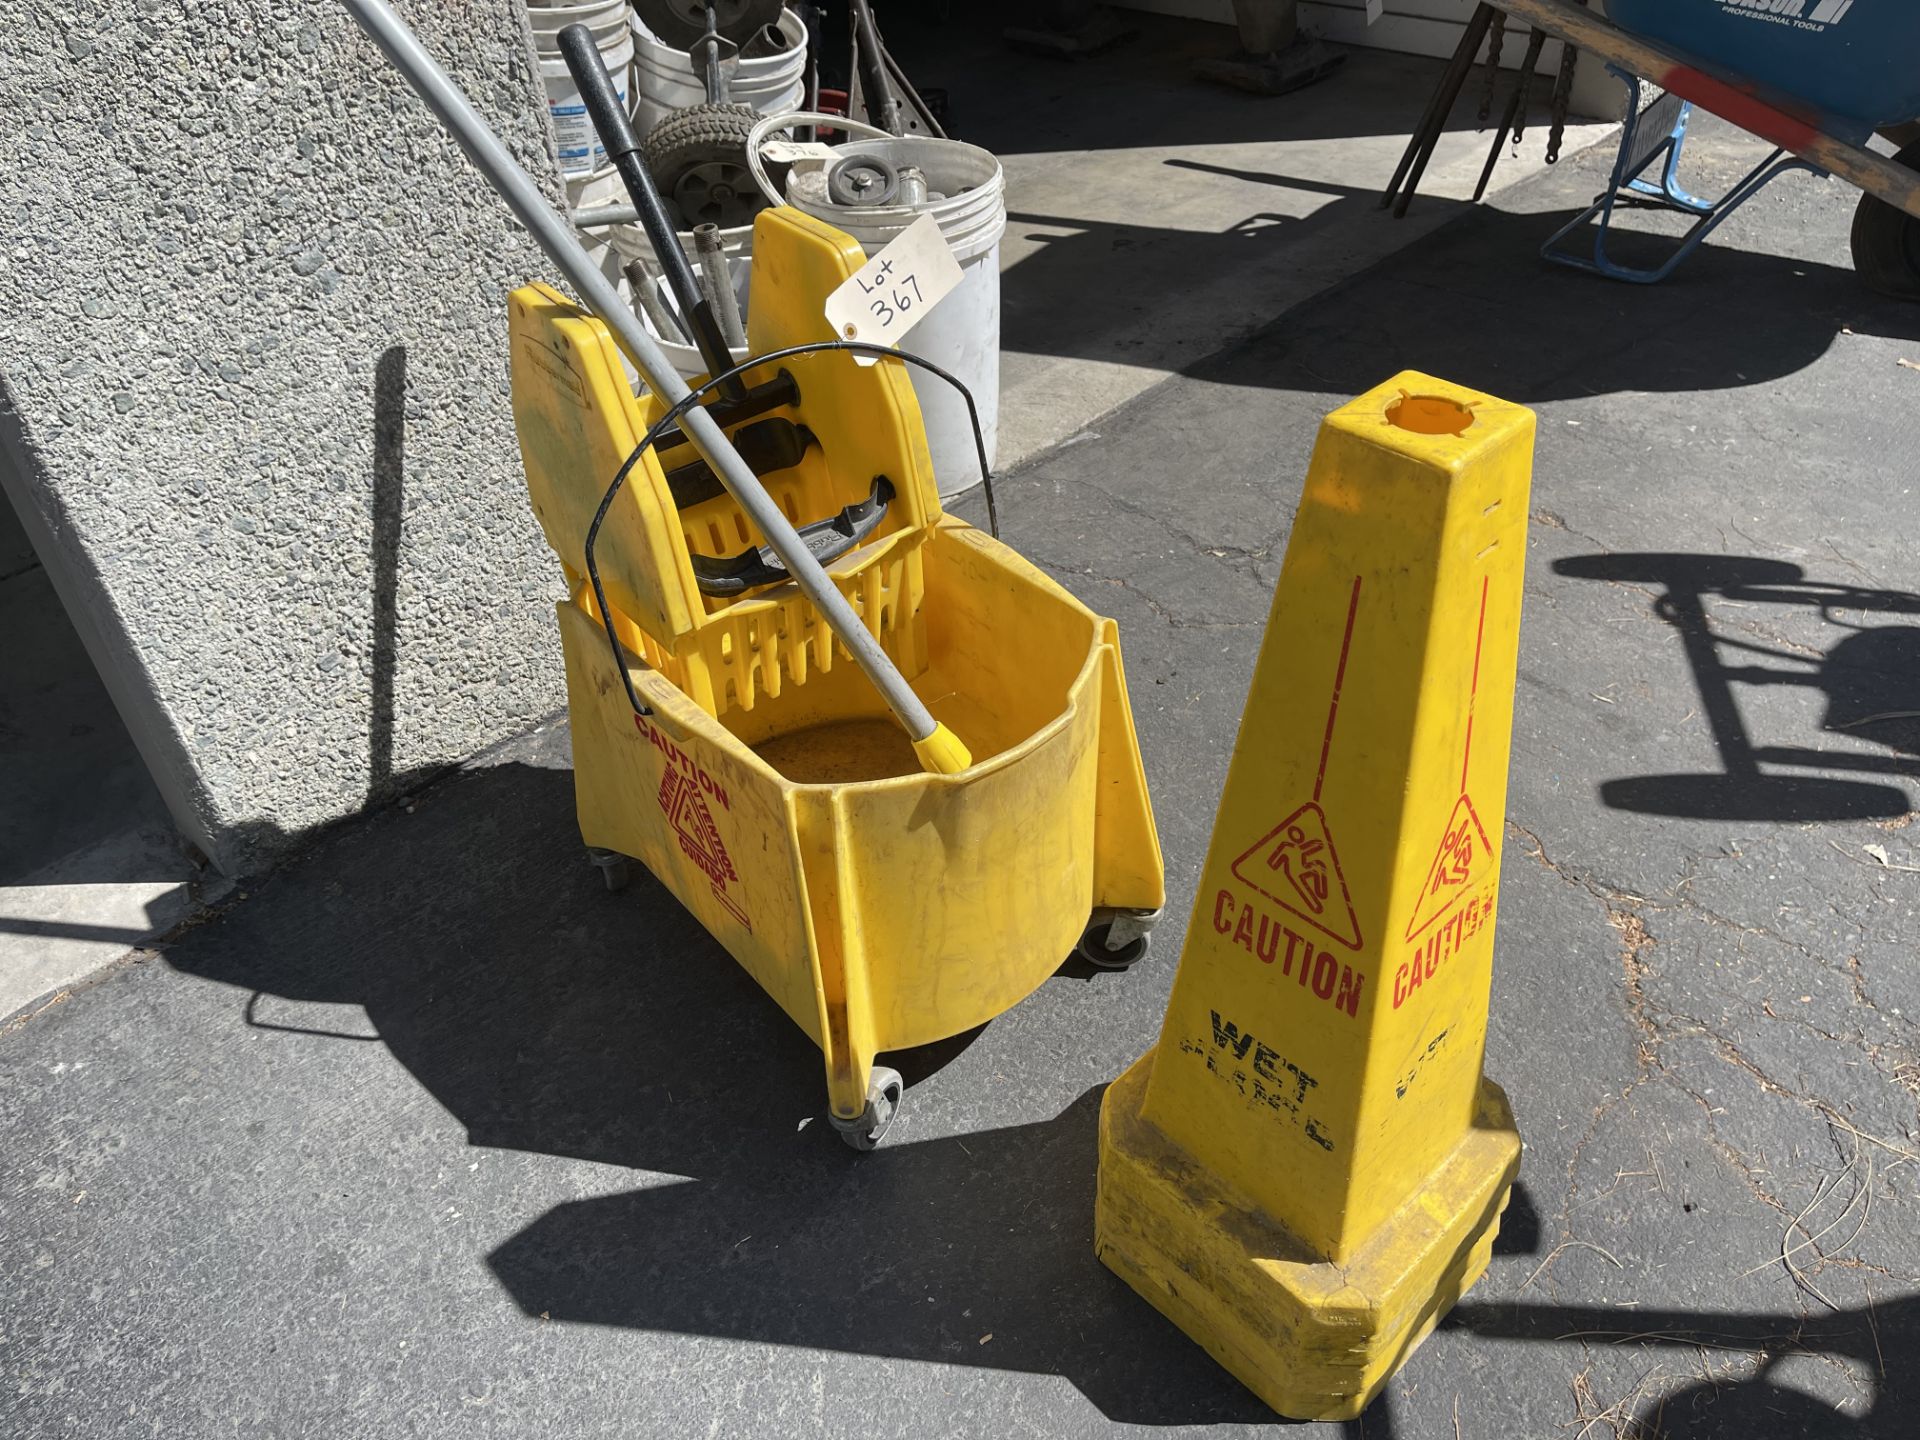 Janitorial mop bucket and three caution cones